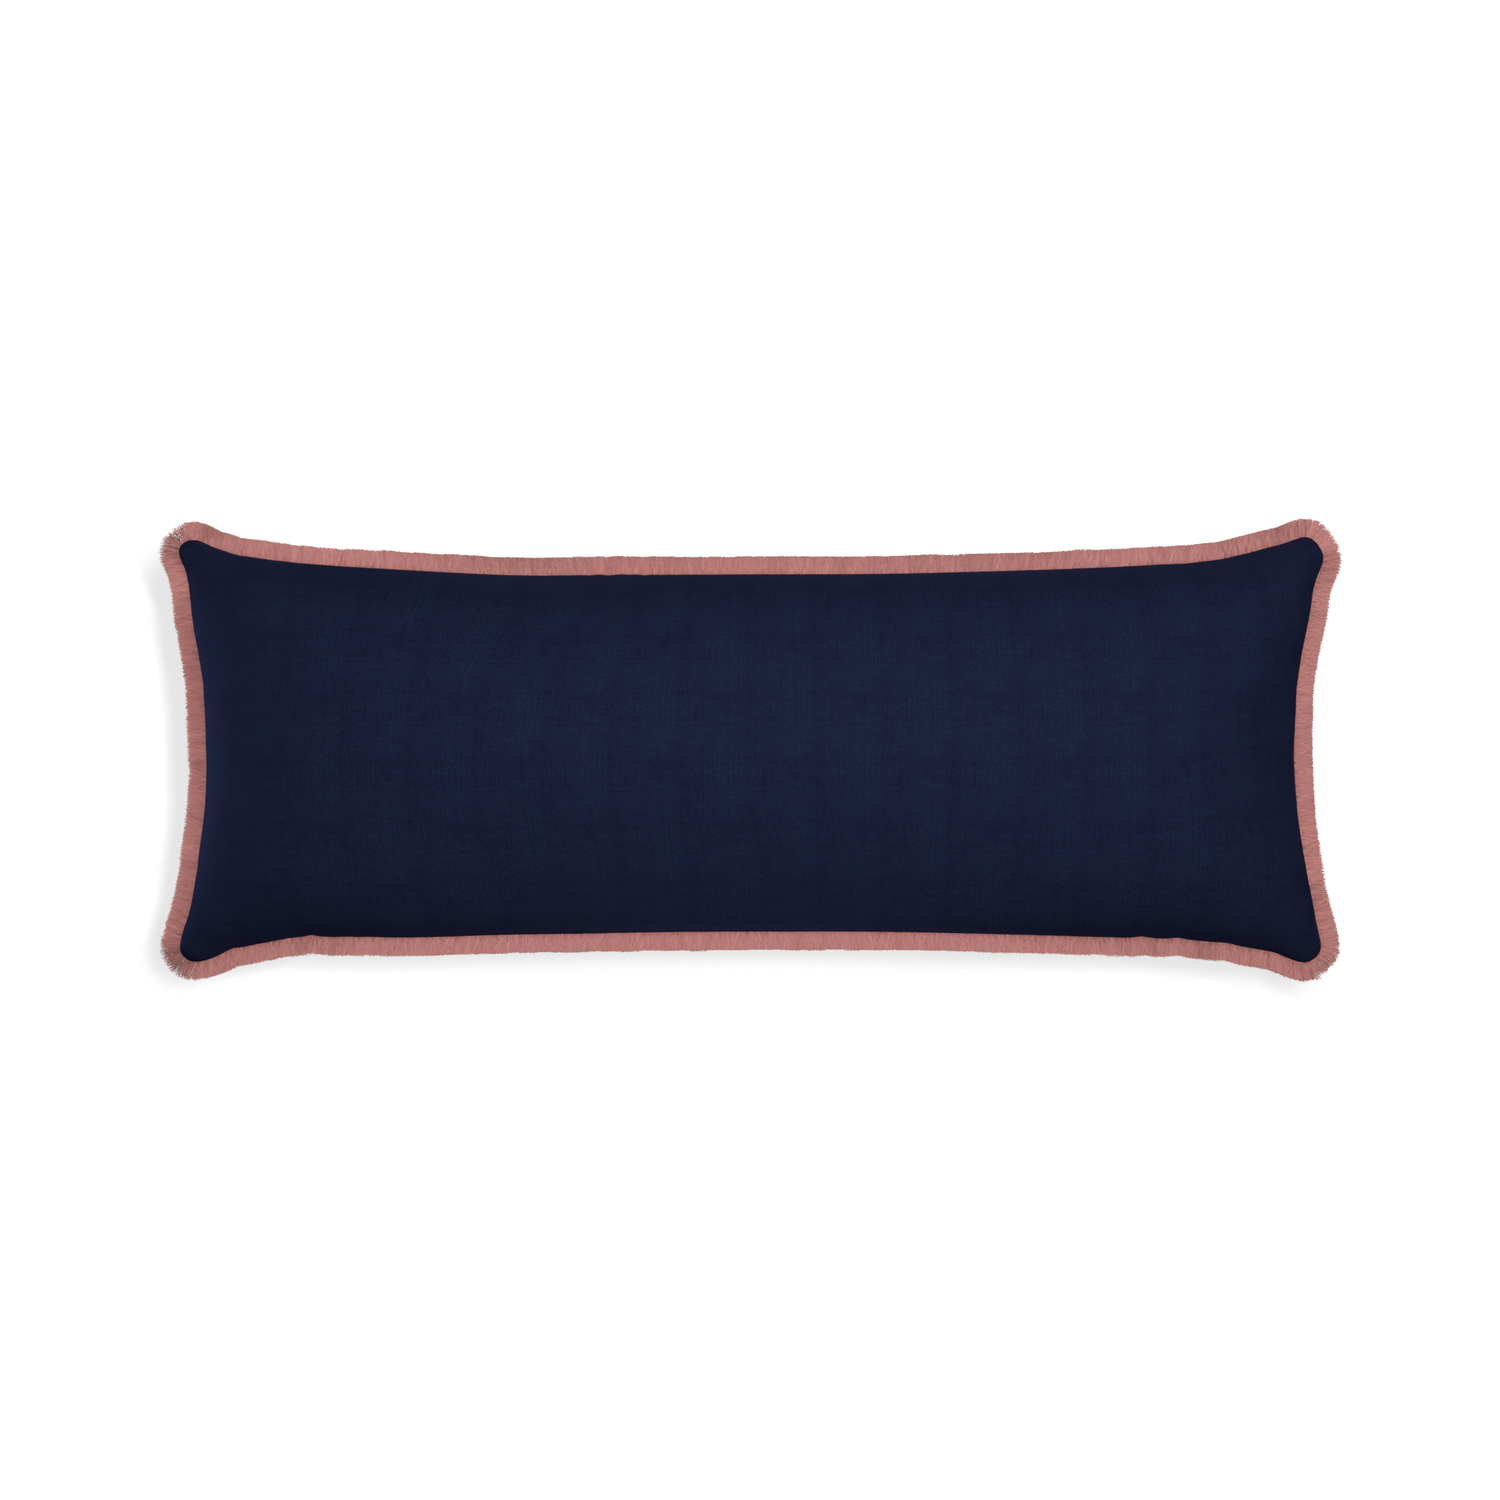 Xl-lumbar midnight custom navy bluepillow with d fringe on white background